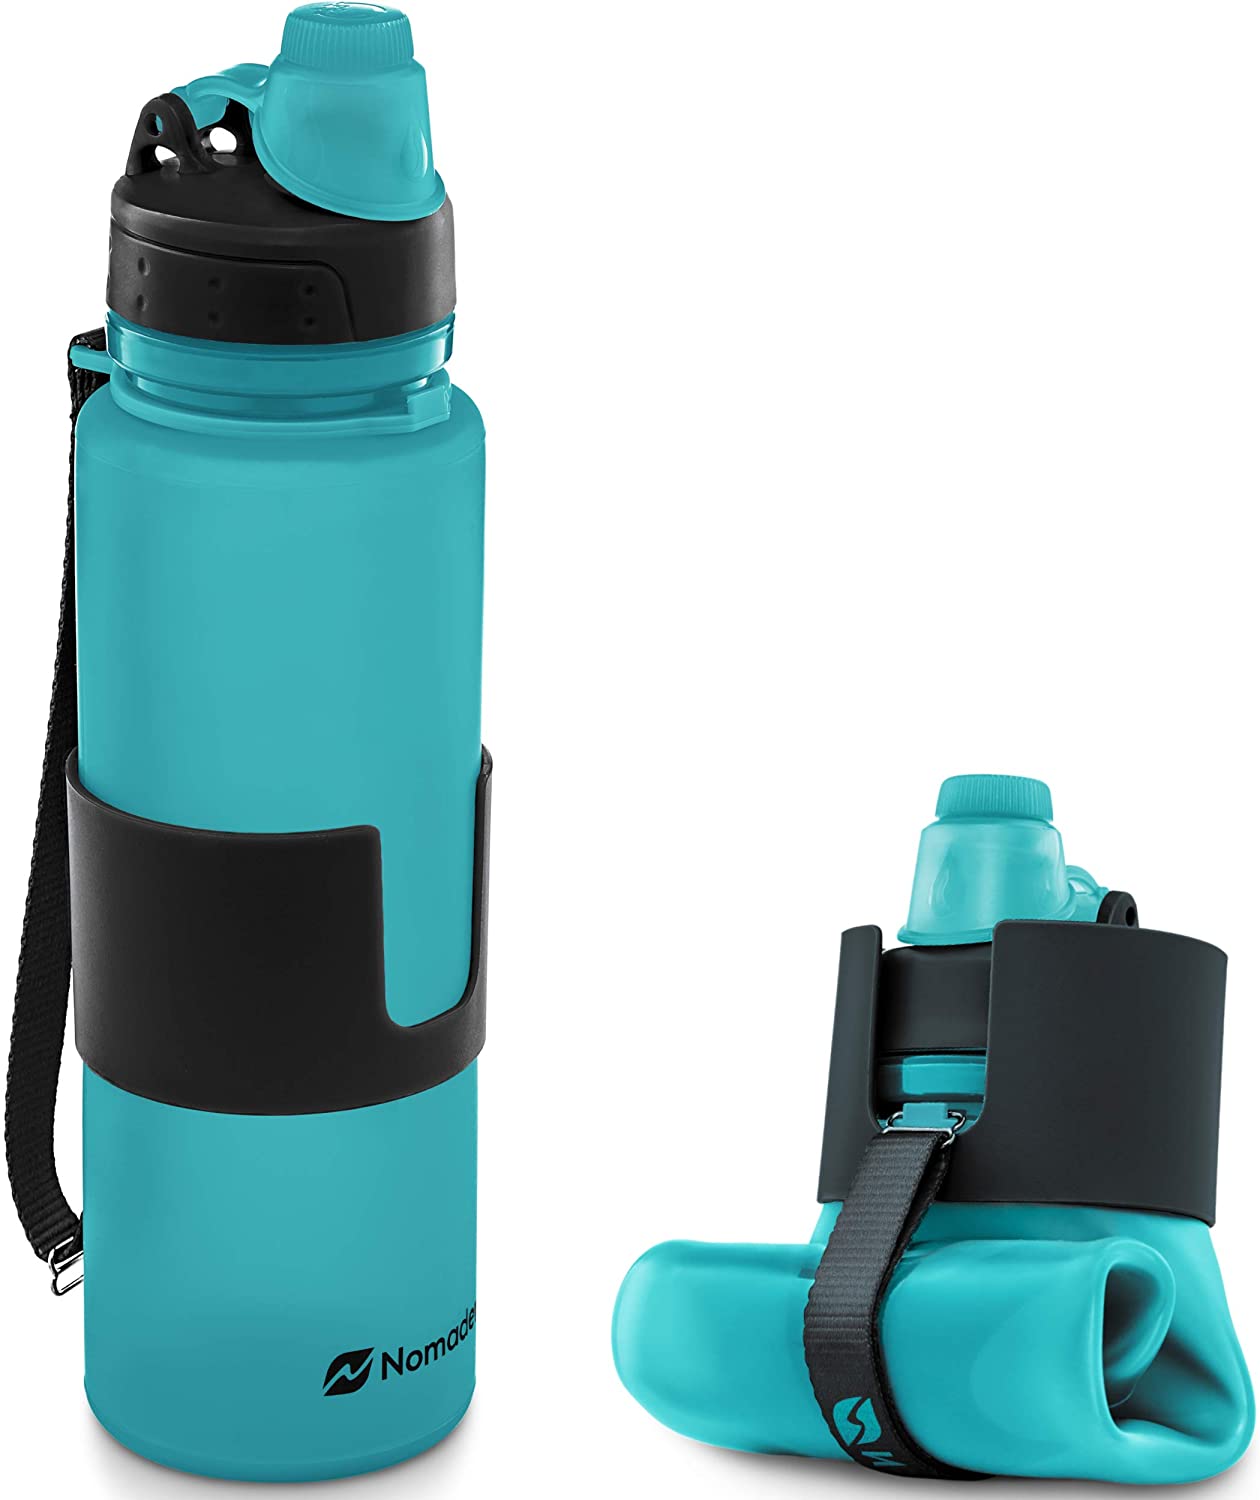 Handy Collapsible Water Bottle